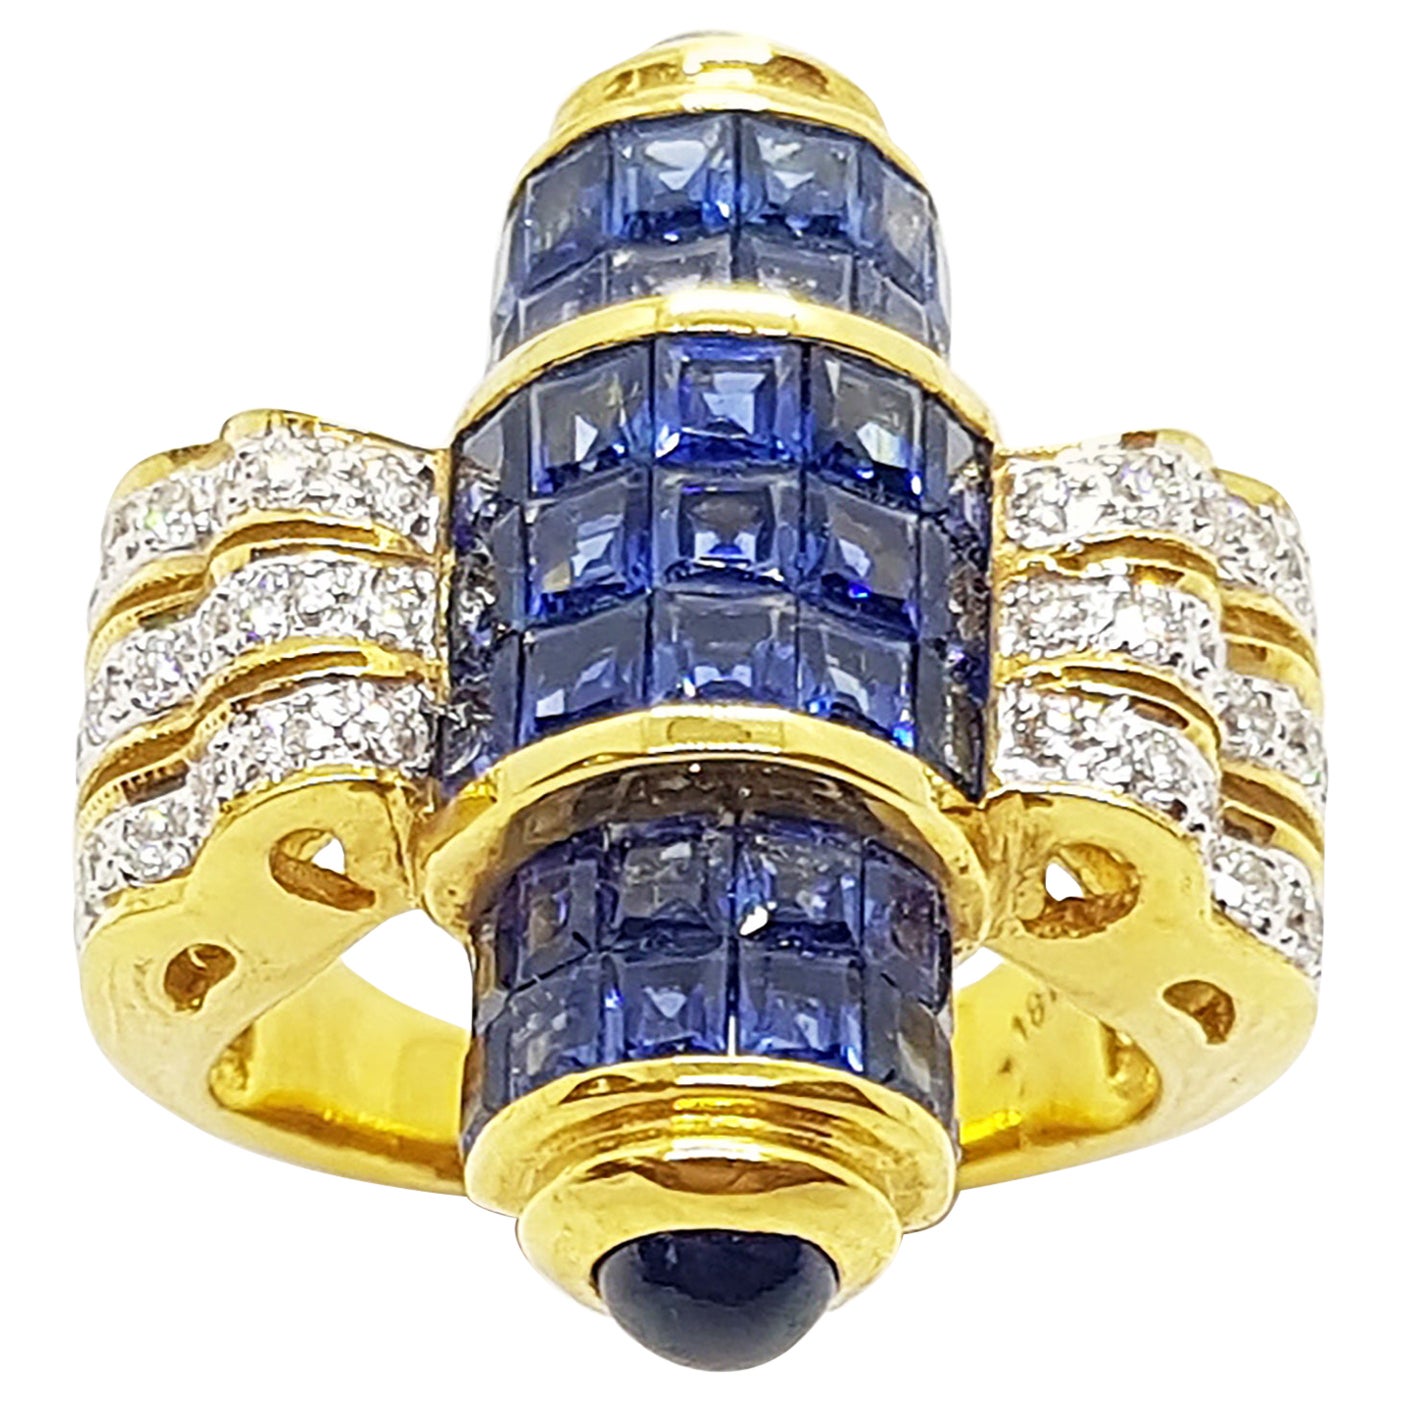 Blue Sapphire with Diamond and Cabochon Blue Sapphire Ring Set in 18 Karat Gold